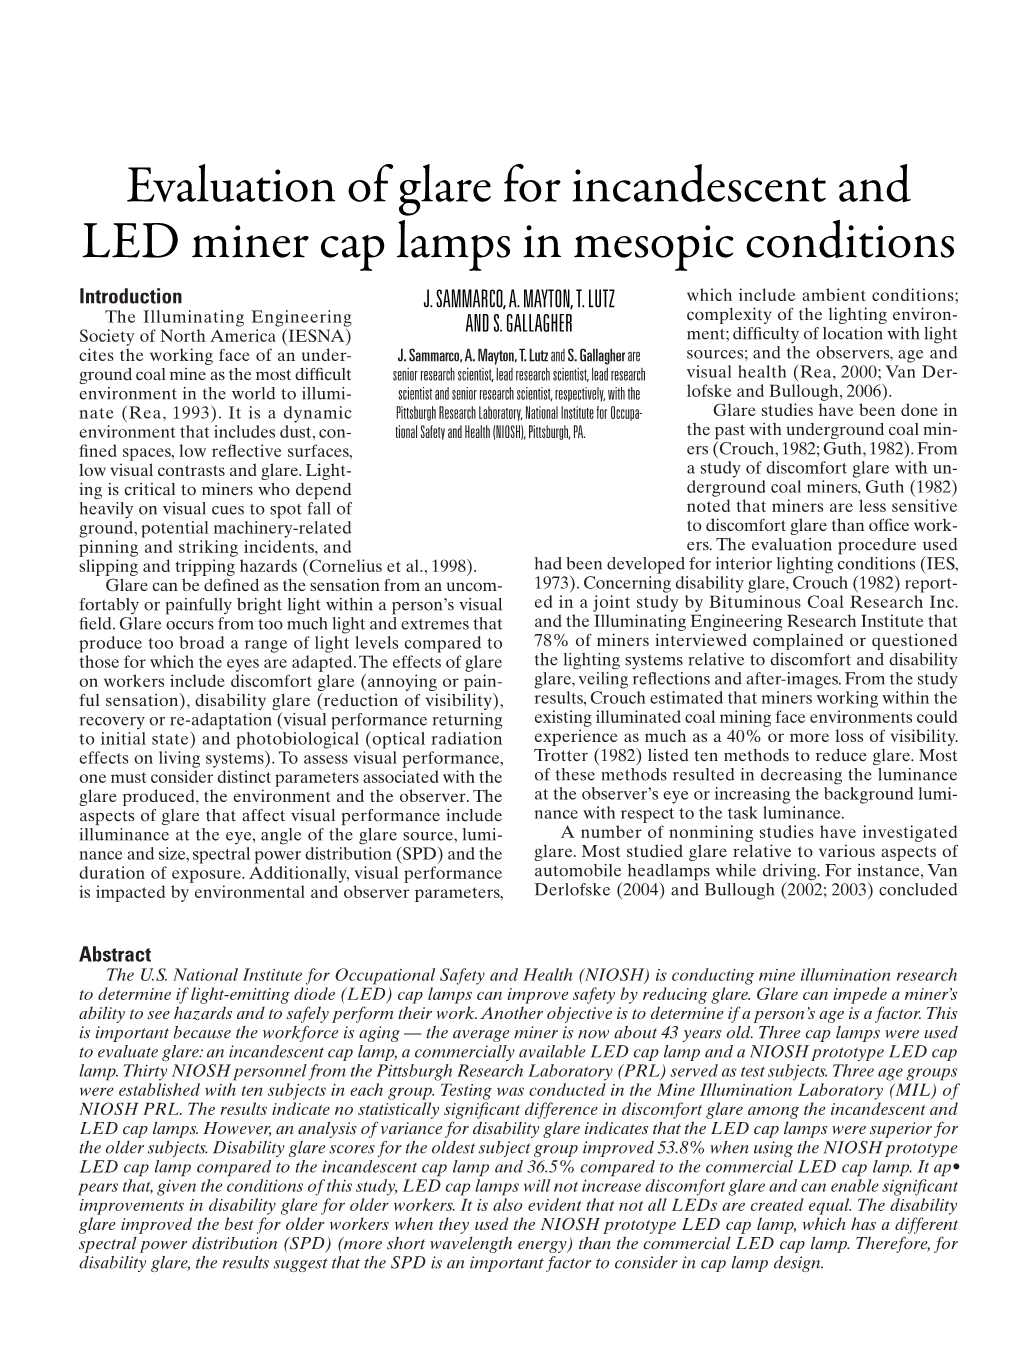 Evaluation of Glare for Incandescent and LED Miner Cap Lamps in Mesopic Conditions Introduction J